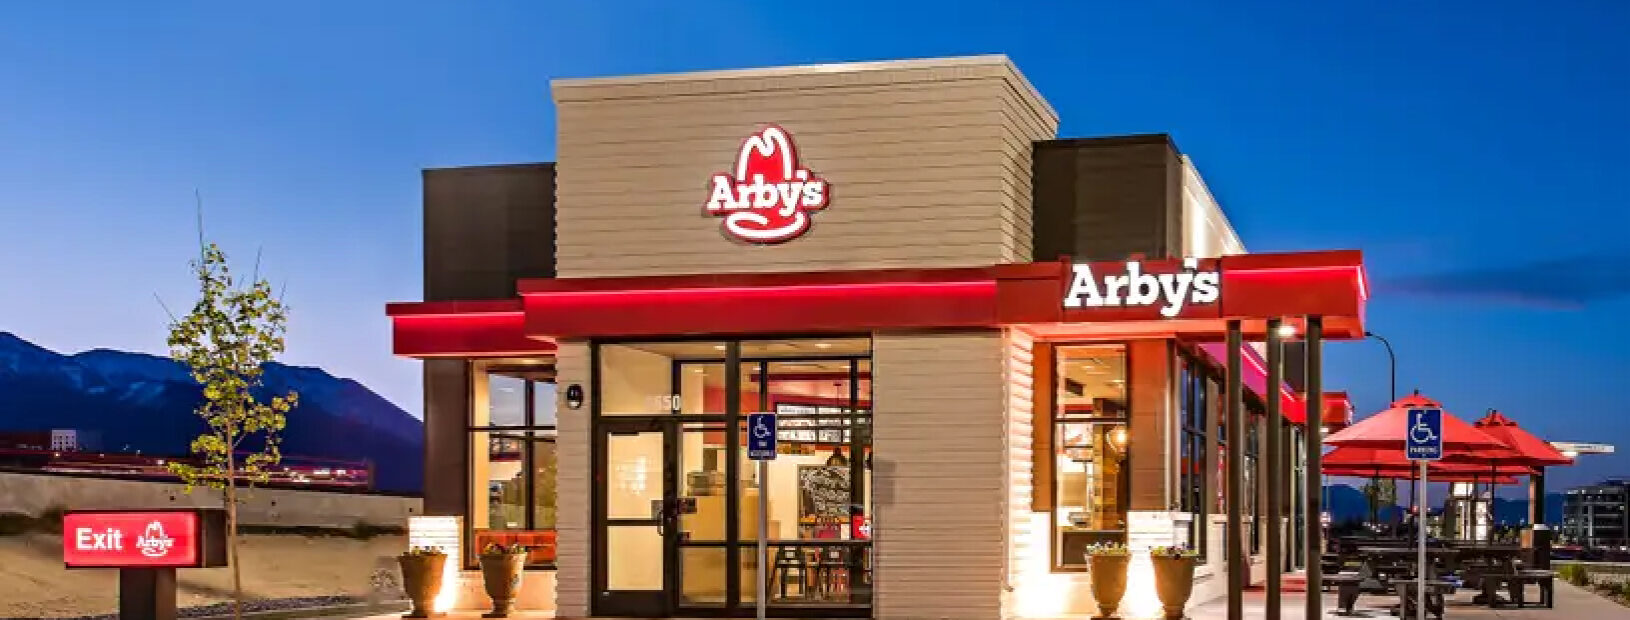 Arby's storefront